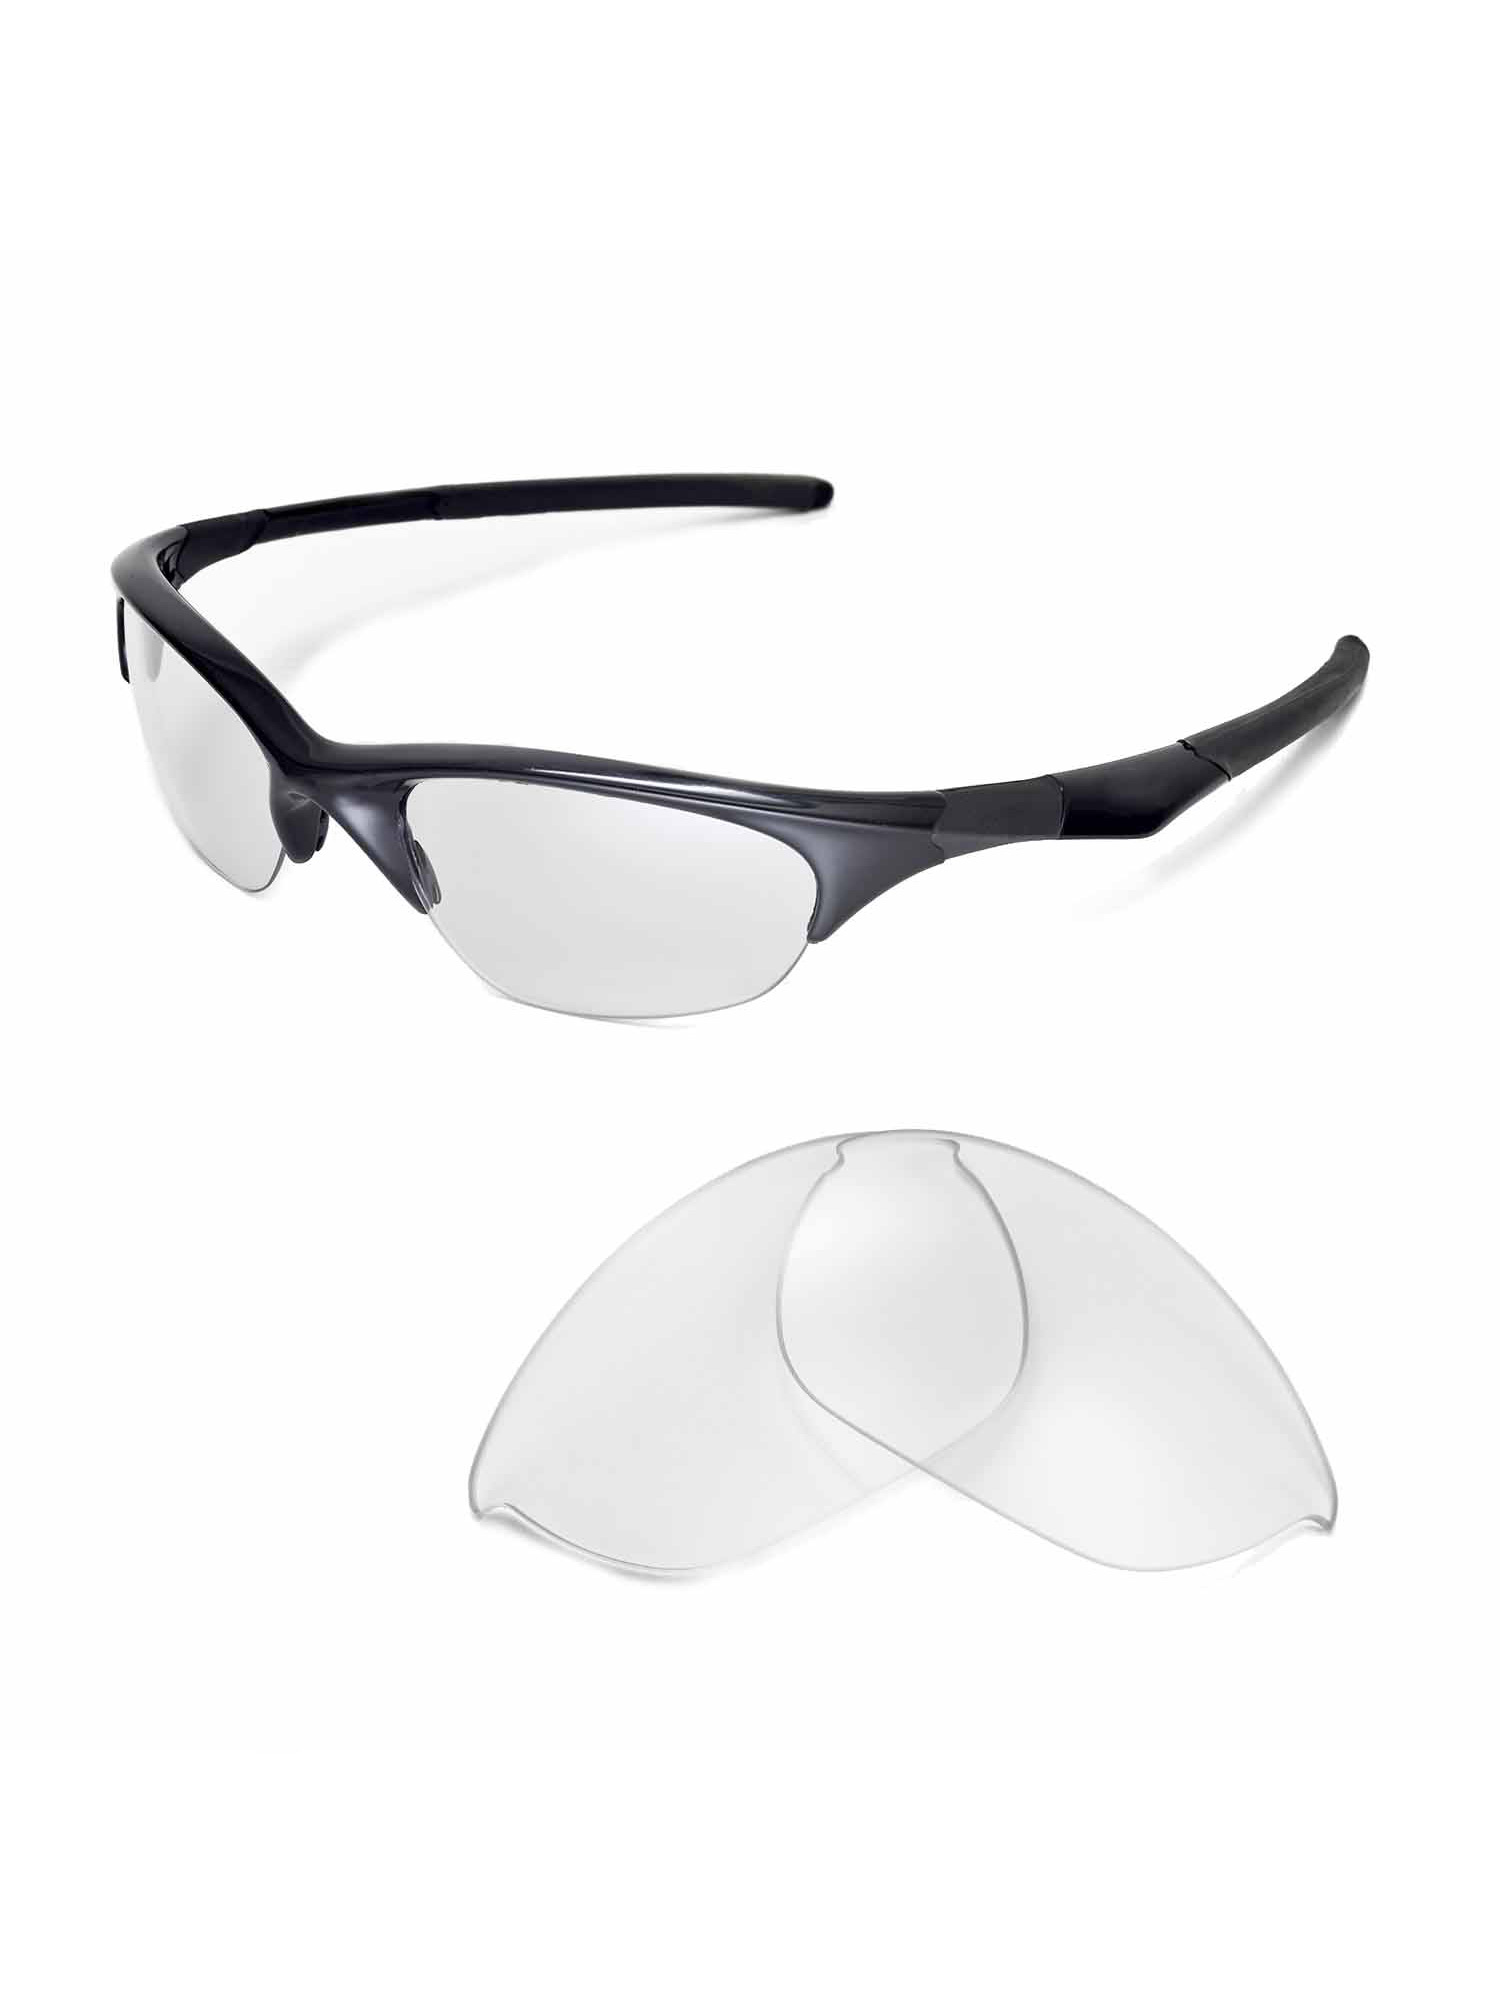 Walleva Clear Replacement Lenses for Oakley Half Jacket Sunglasses - image 1 of 7